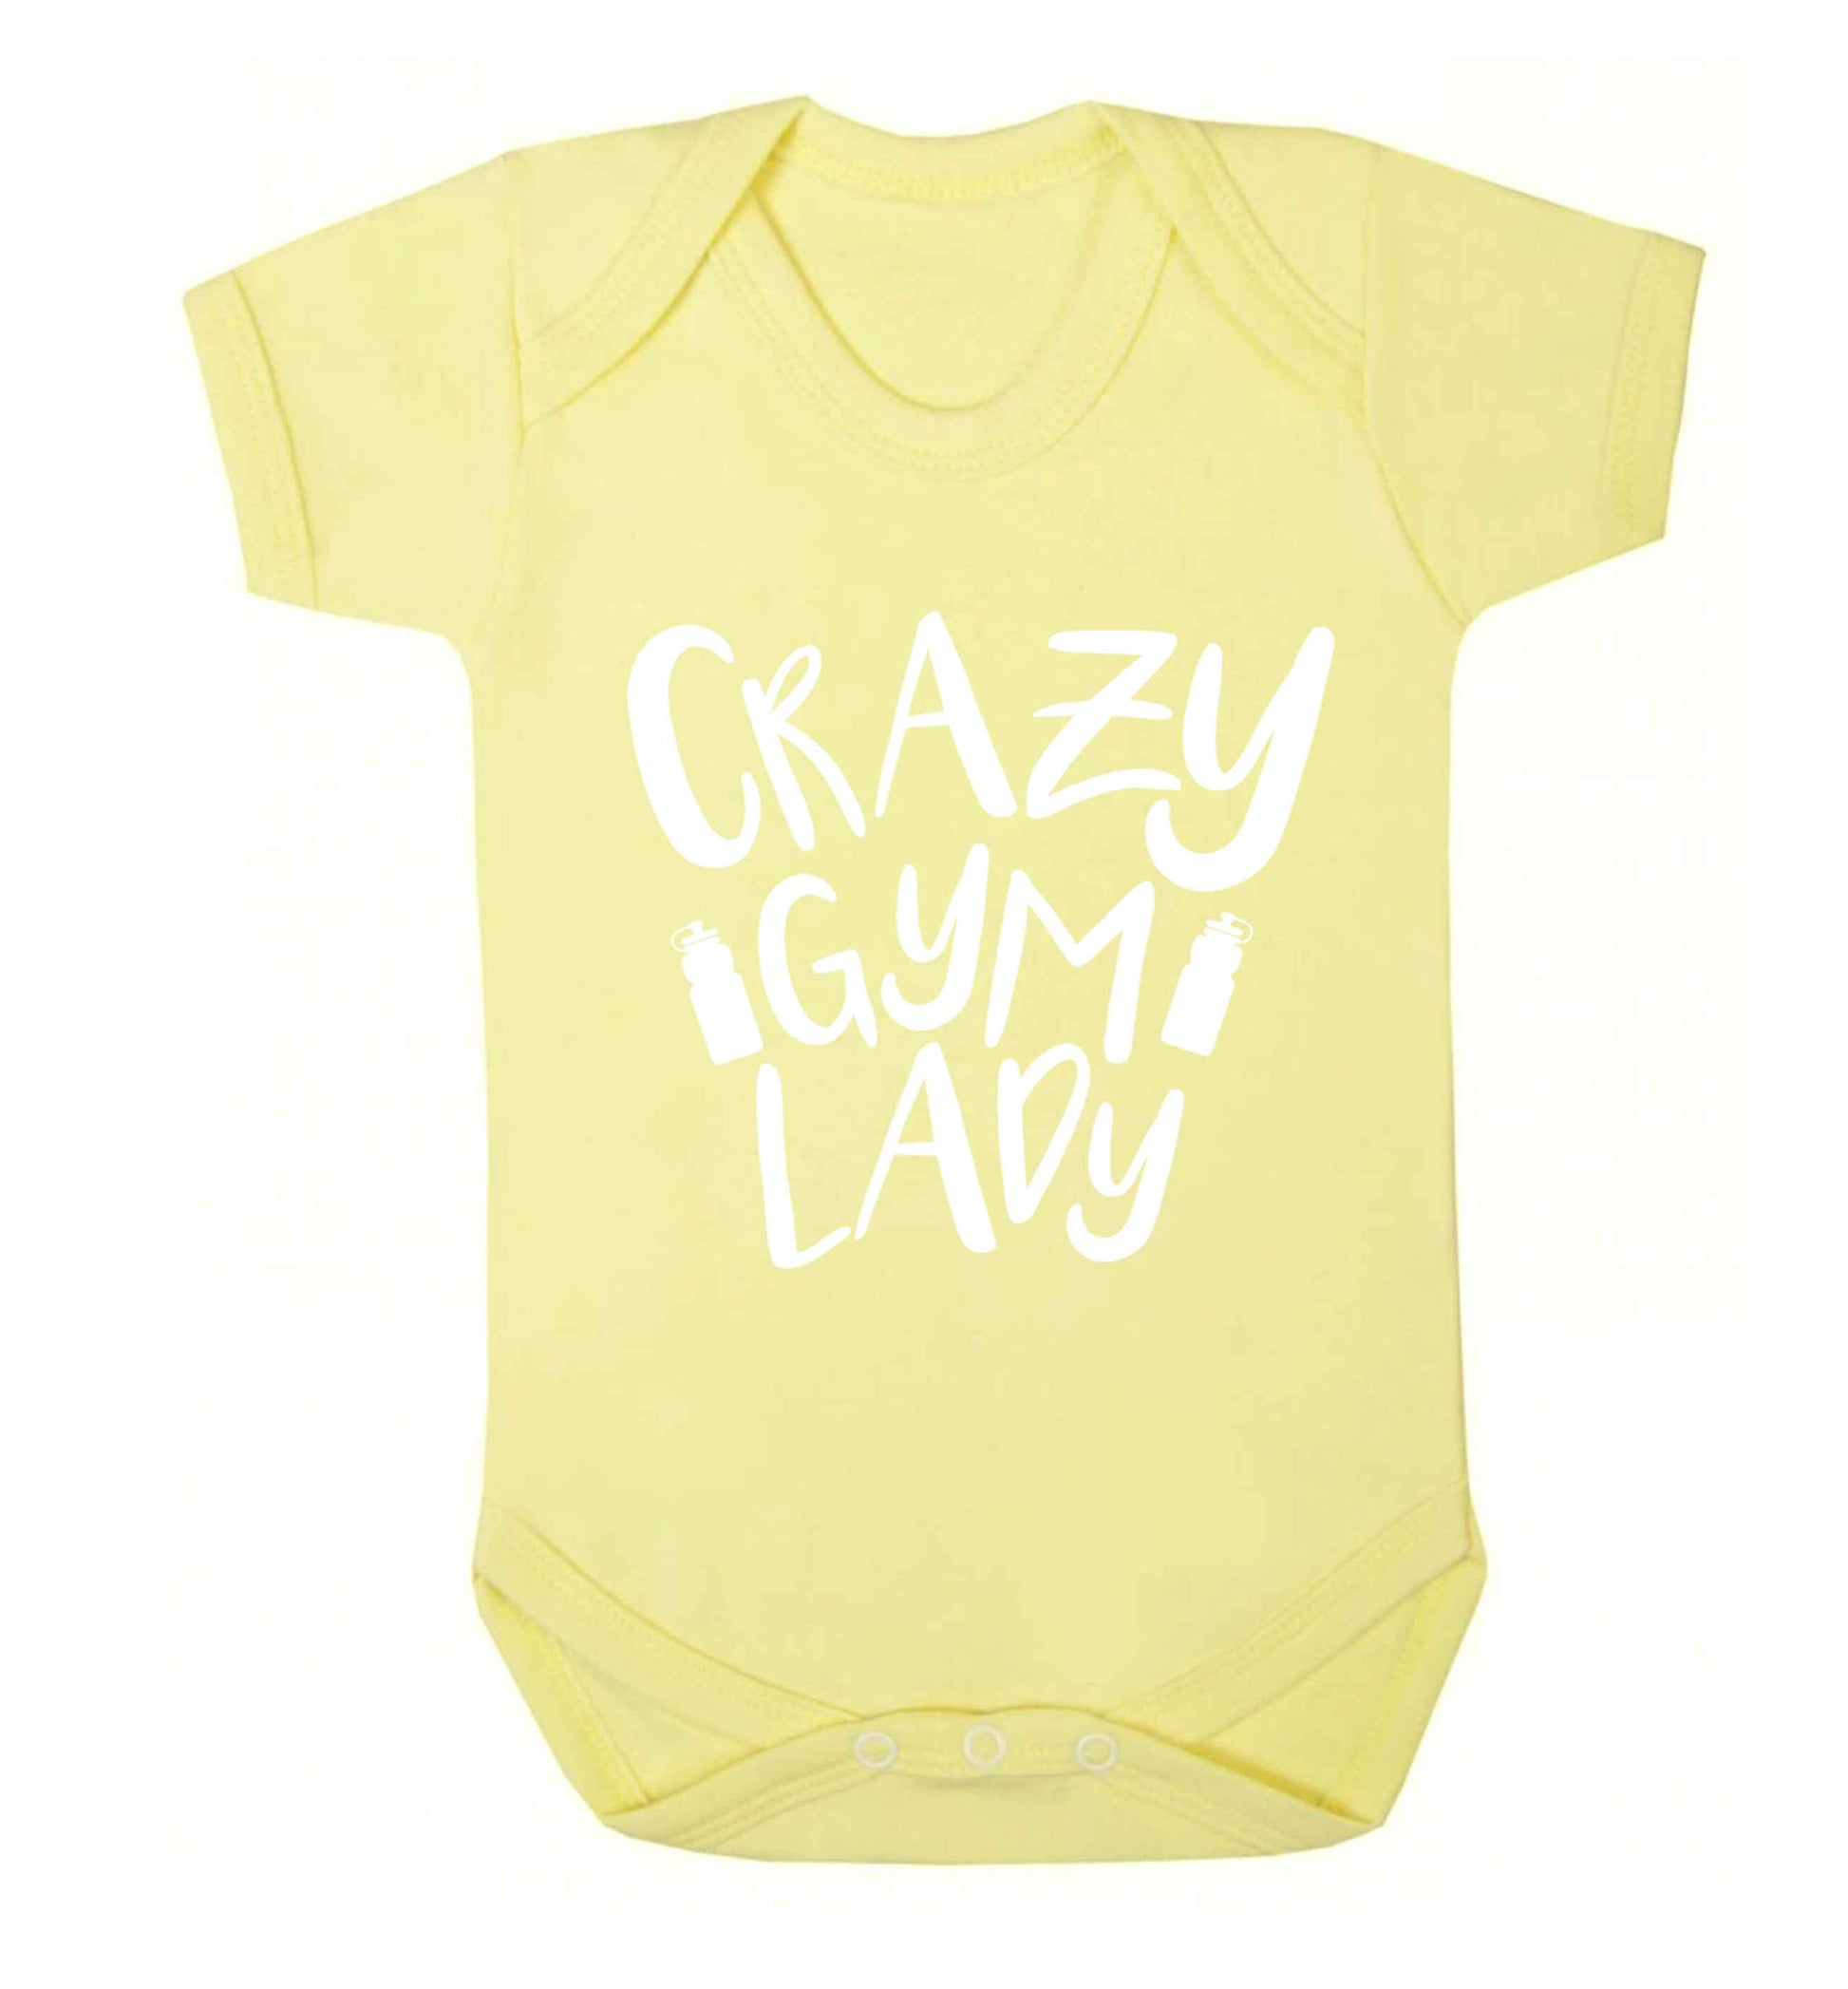 Crazy gym lady Baby Vest pale yellow 18-24 months